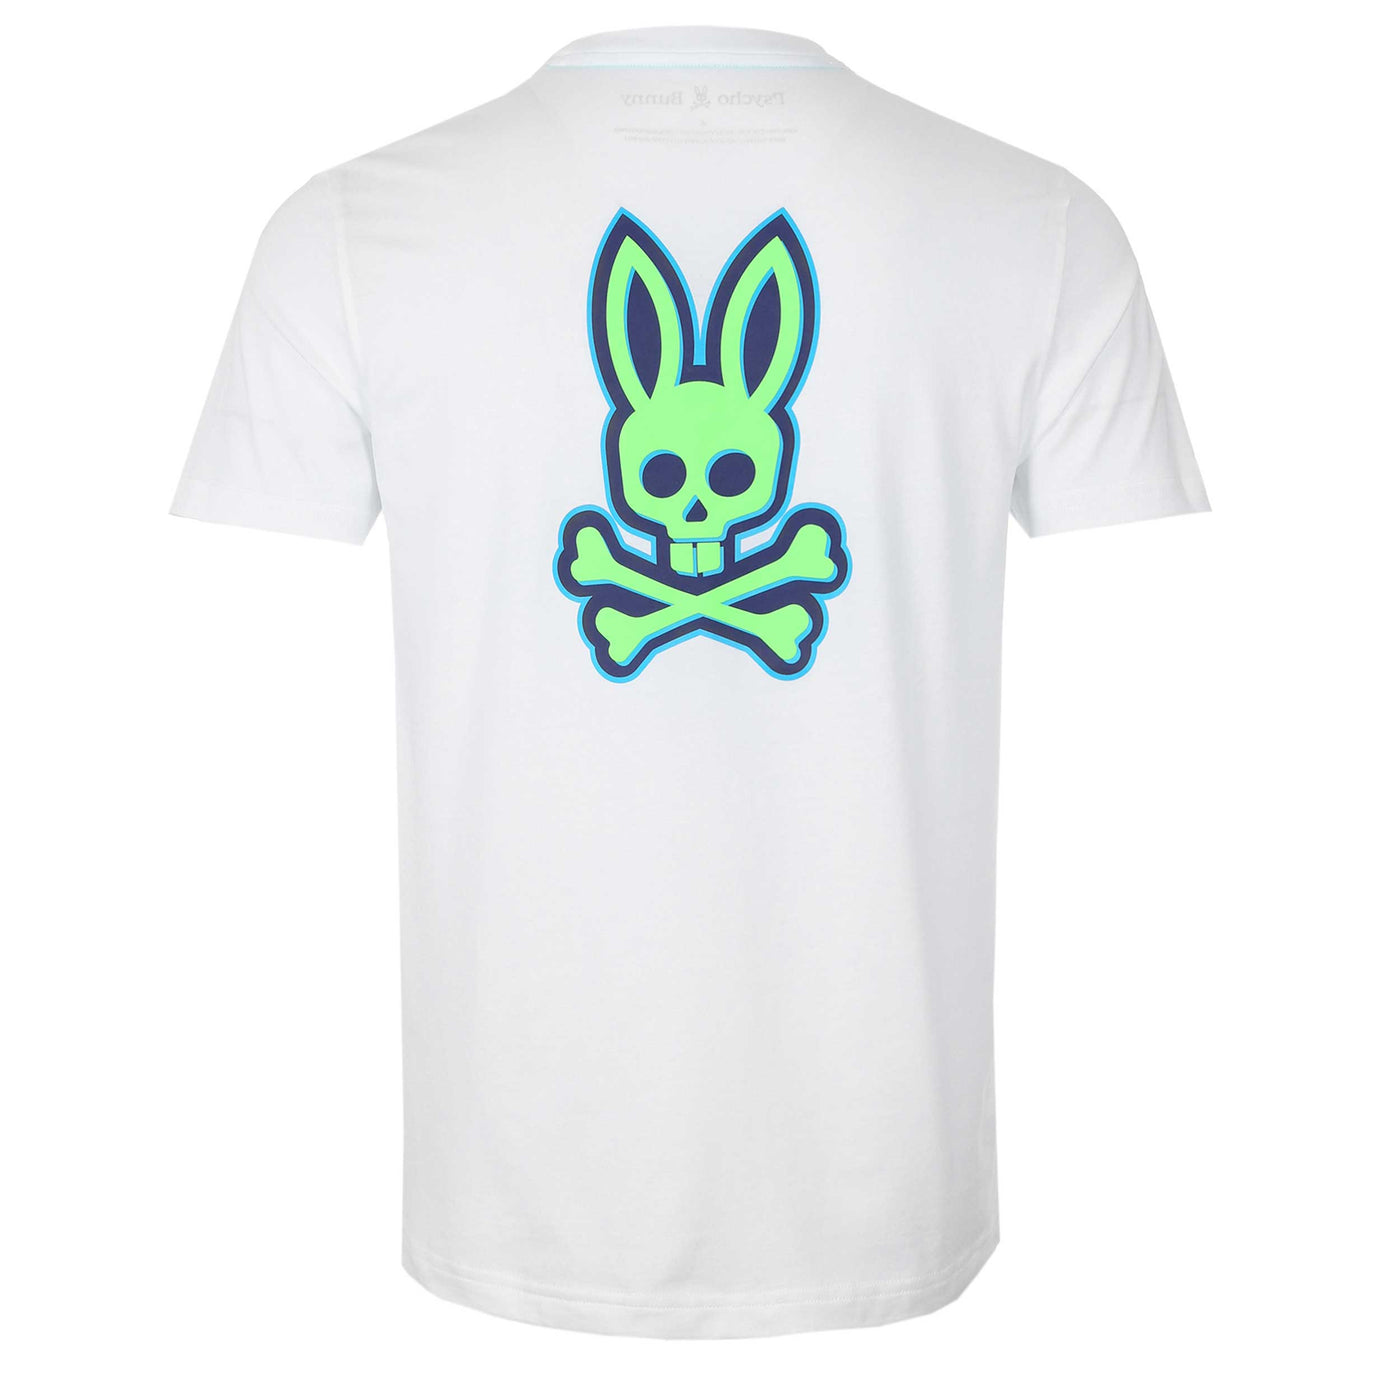 Psycho Bunny Sloan Back Graphic T Shirt in White Back